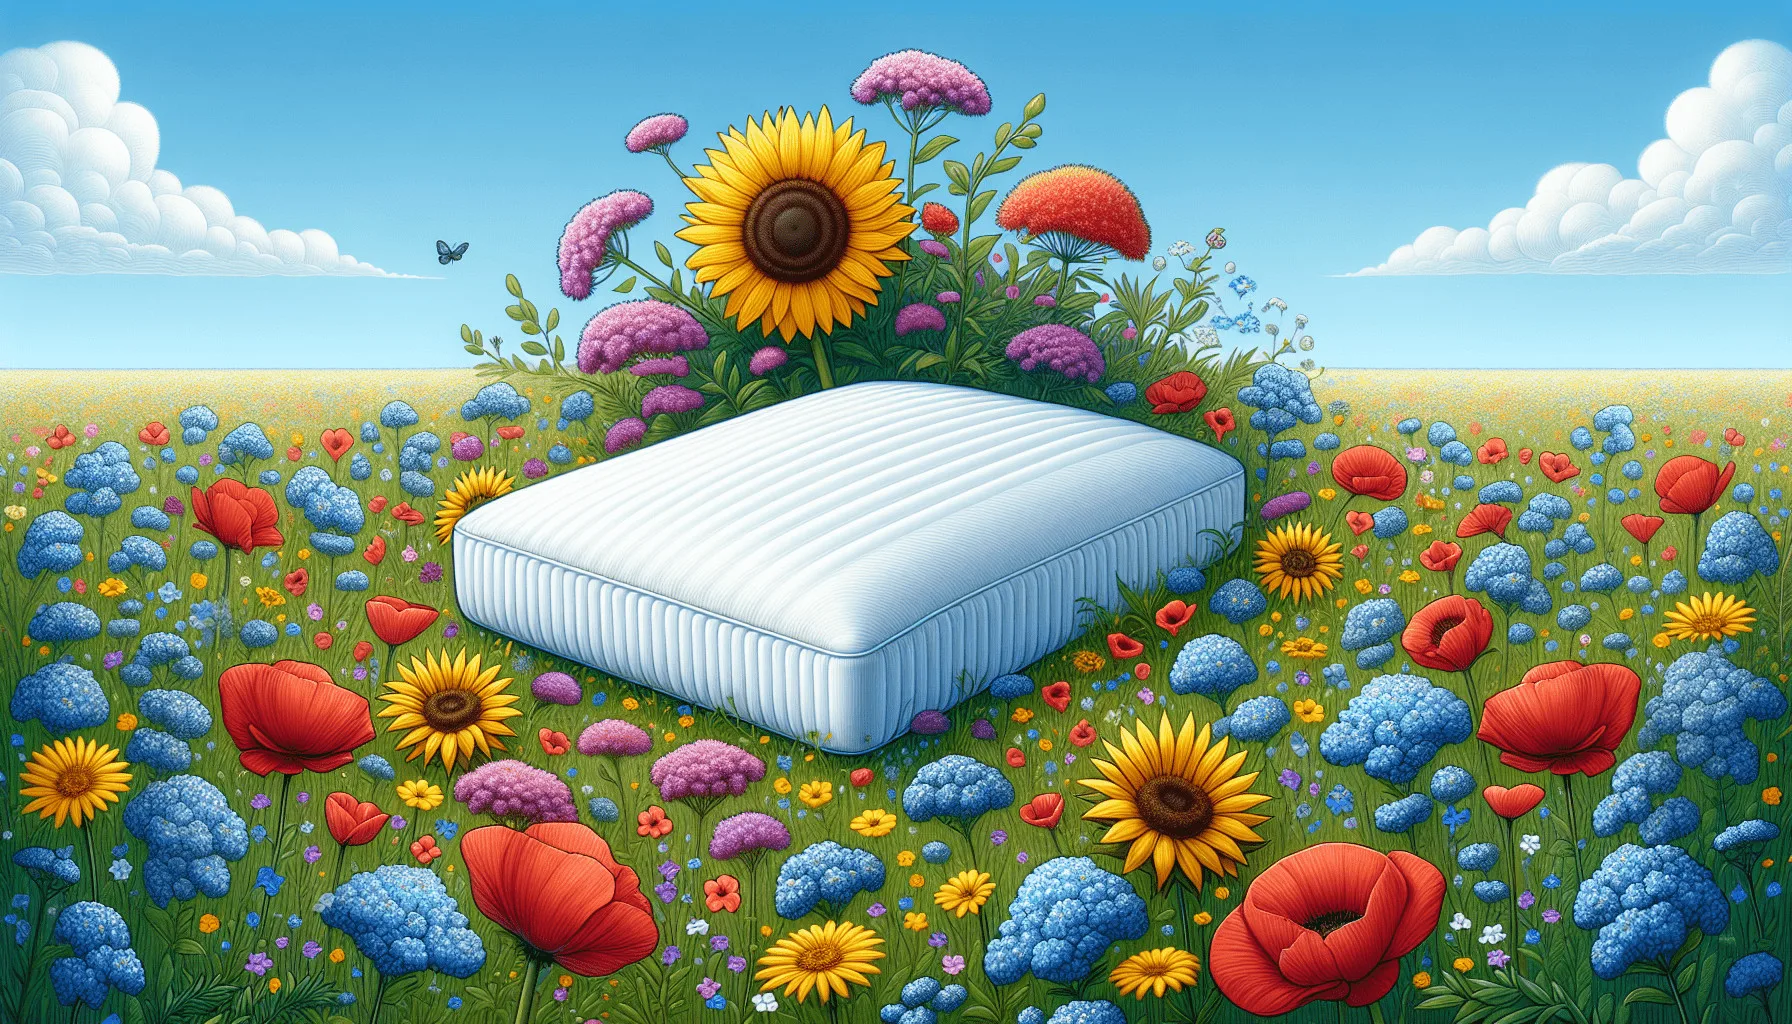 Memory Foam Mattresses And Allergies: Debunking The Myths